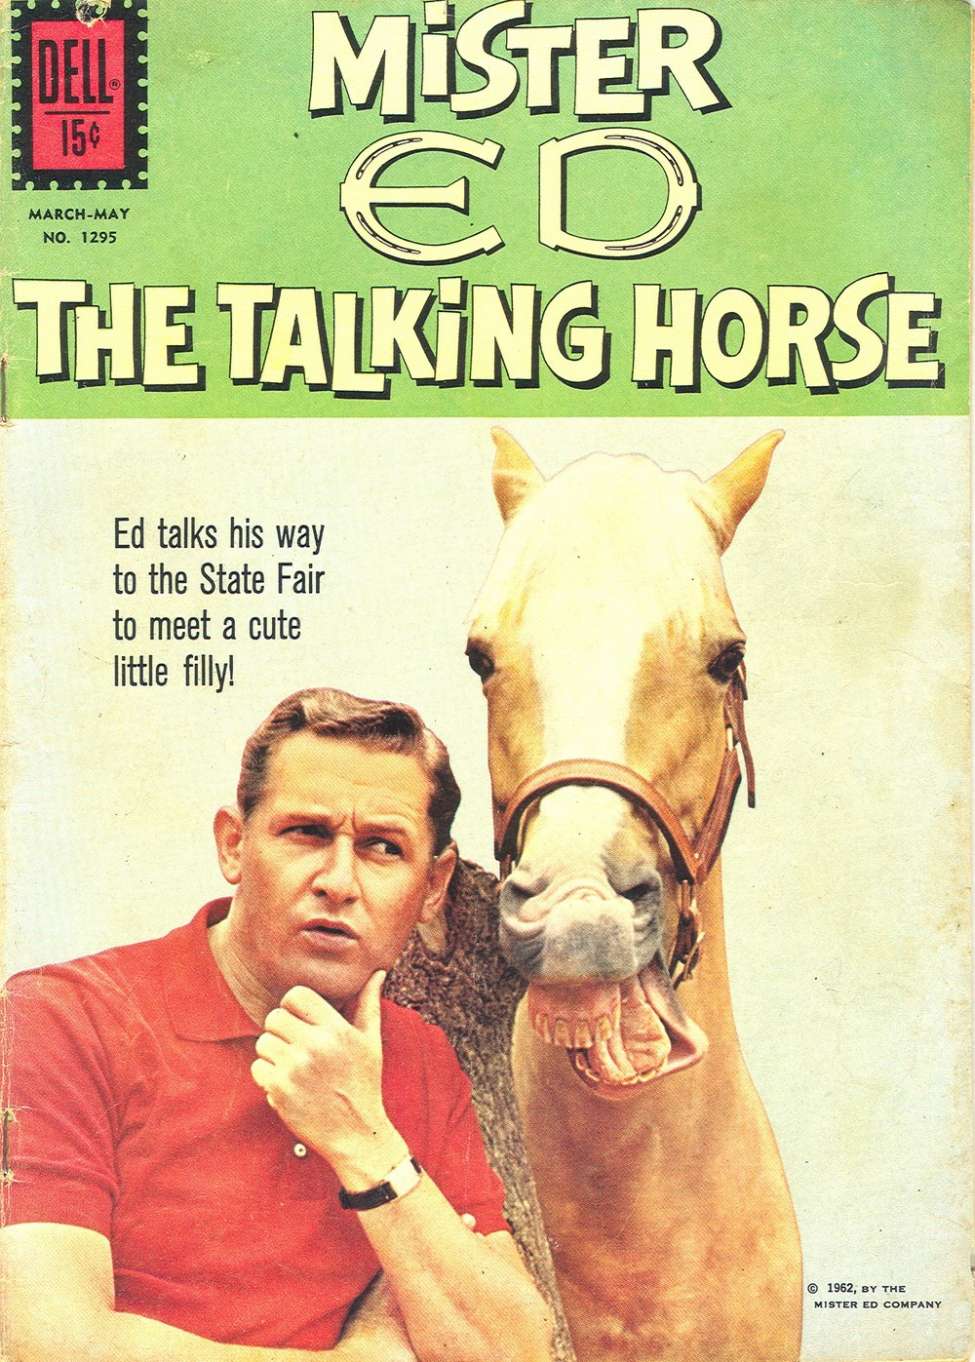 Book Cover For 1295 - Mister Ed, The Talking Horse